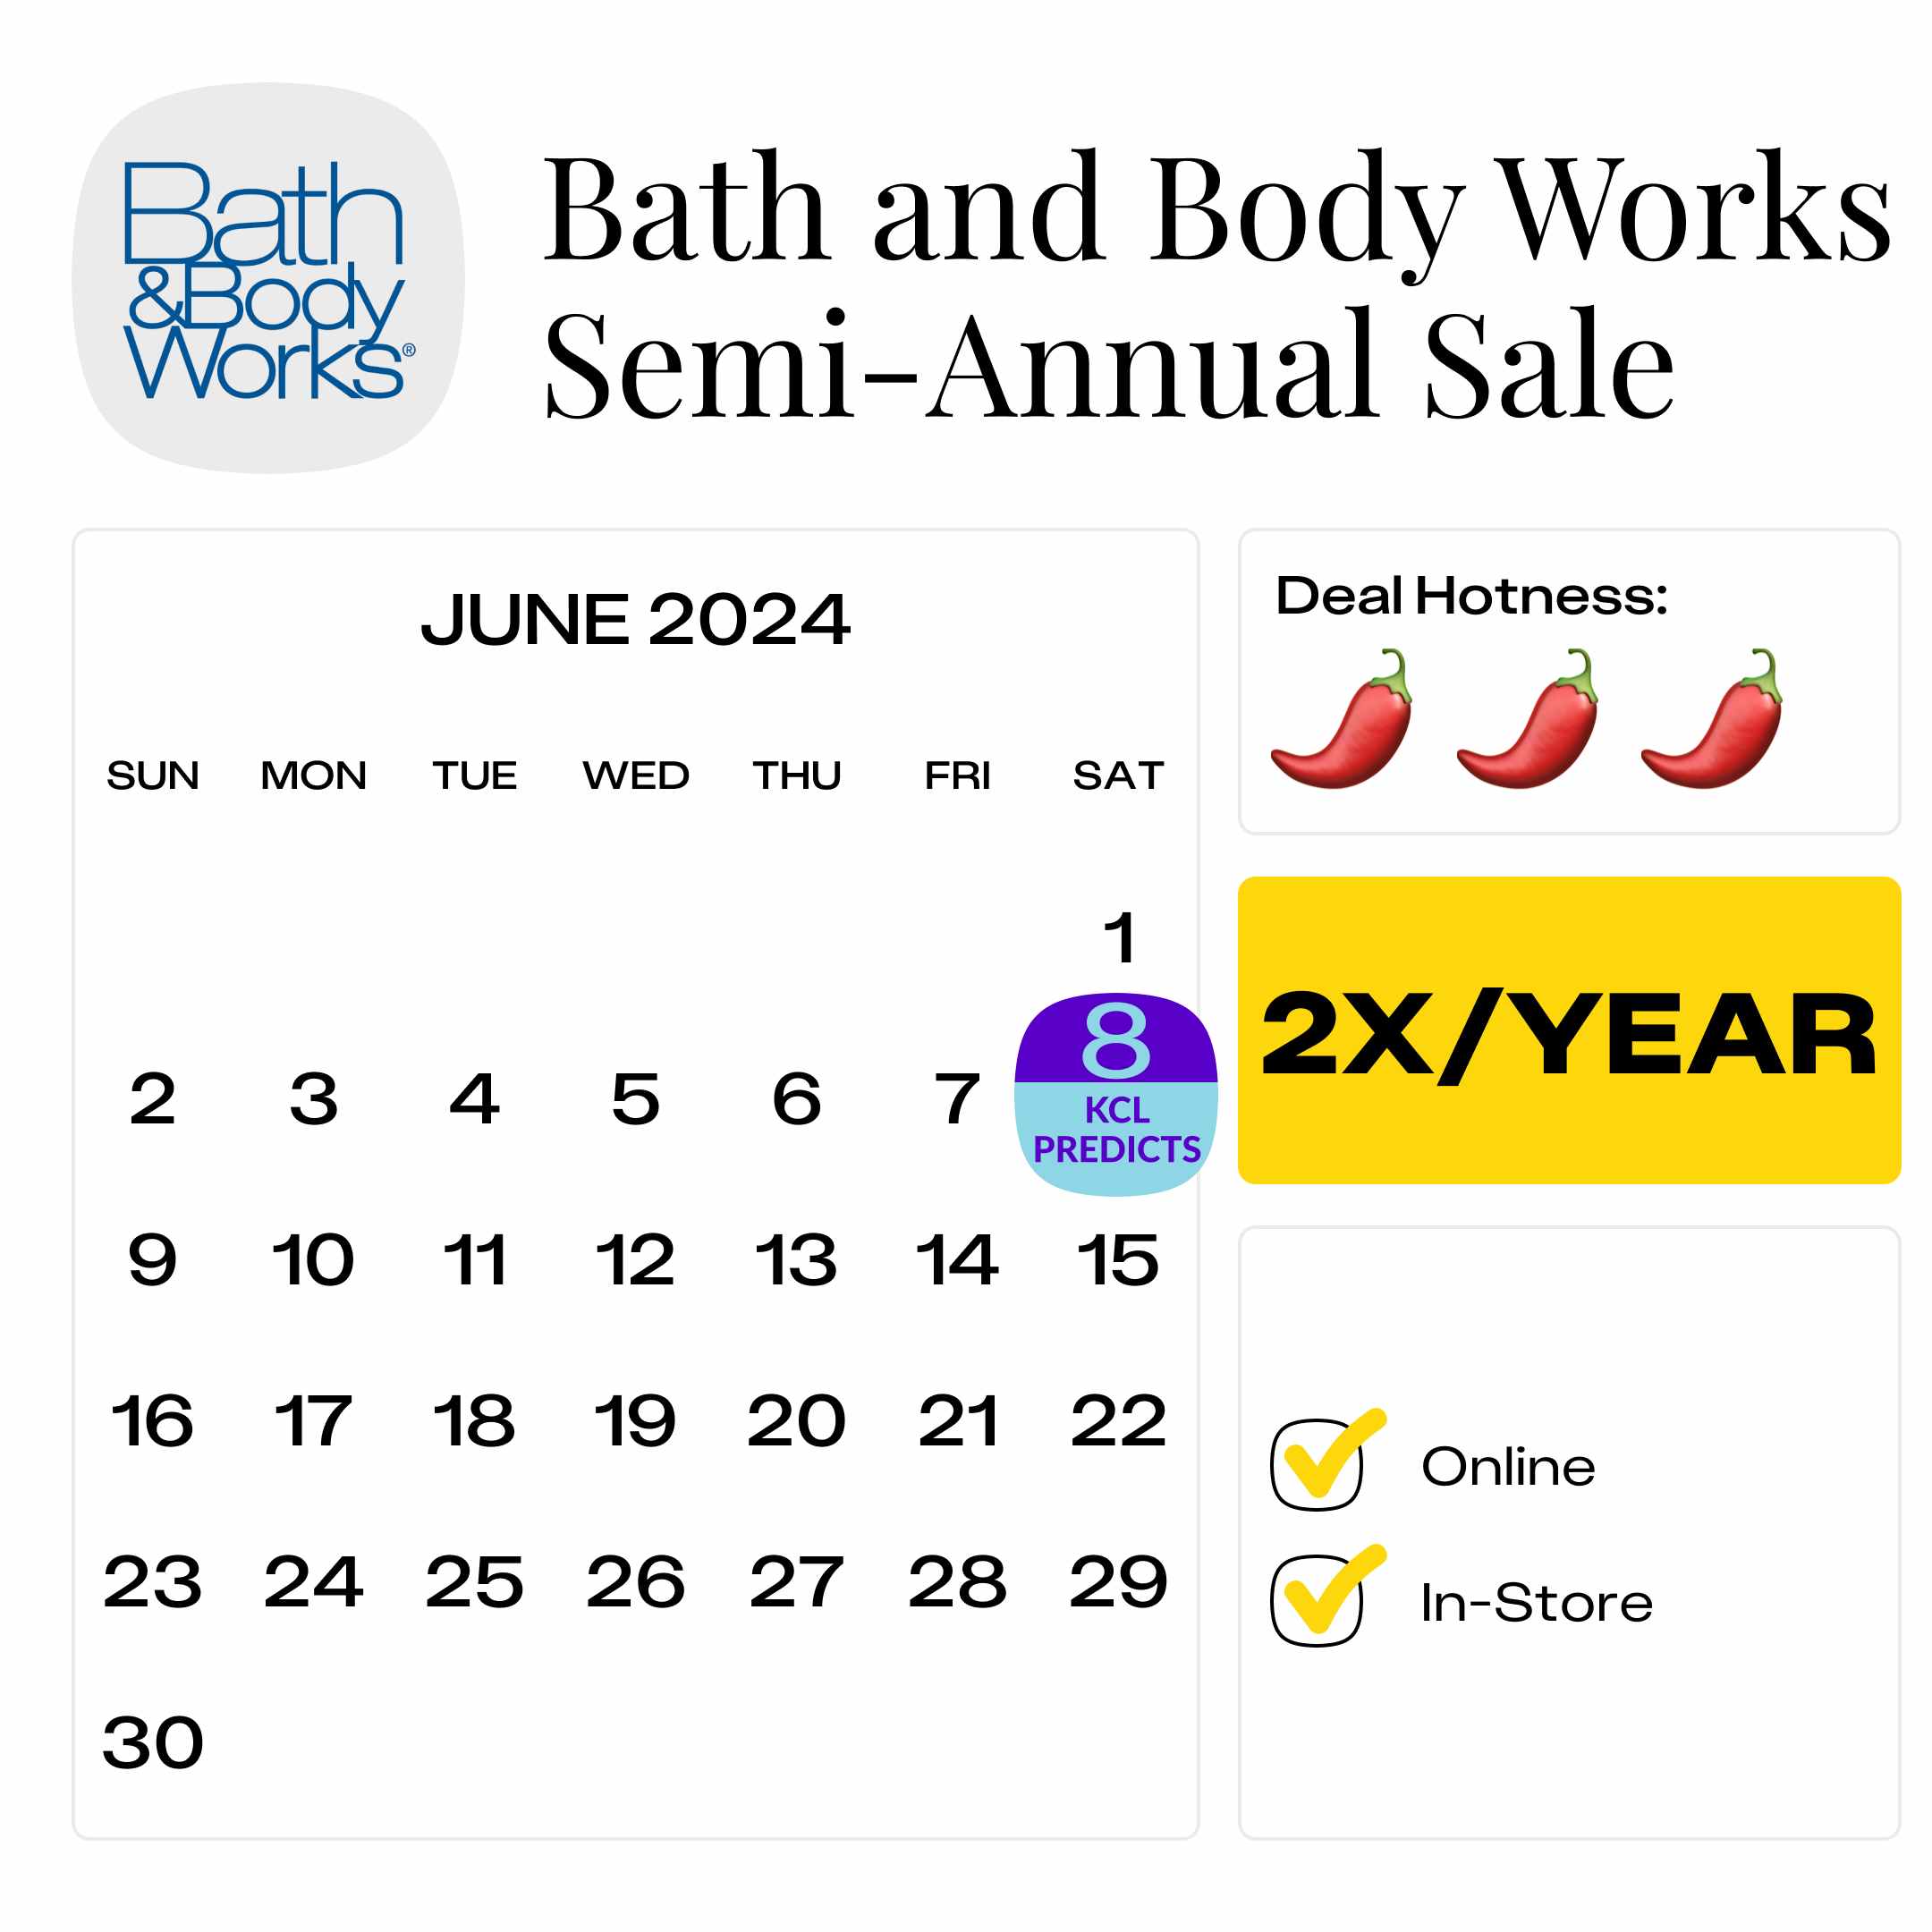 Bath & Body Works Semi-Annual Sale: How to Shop It to Save 75